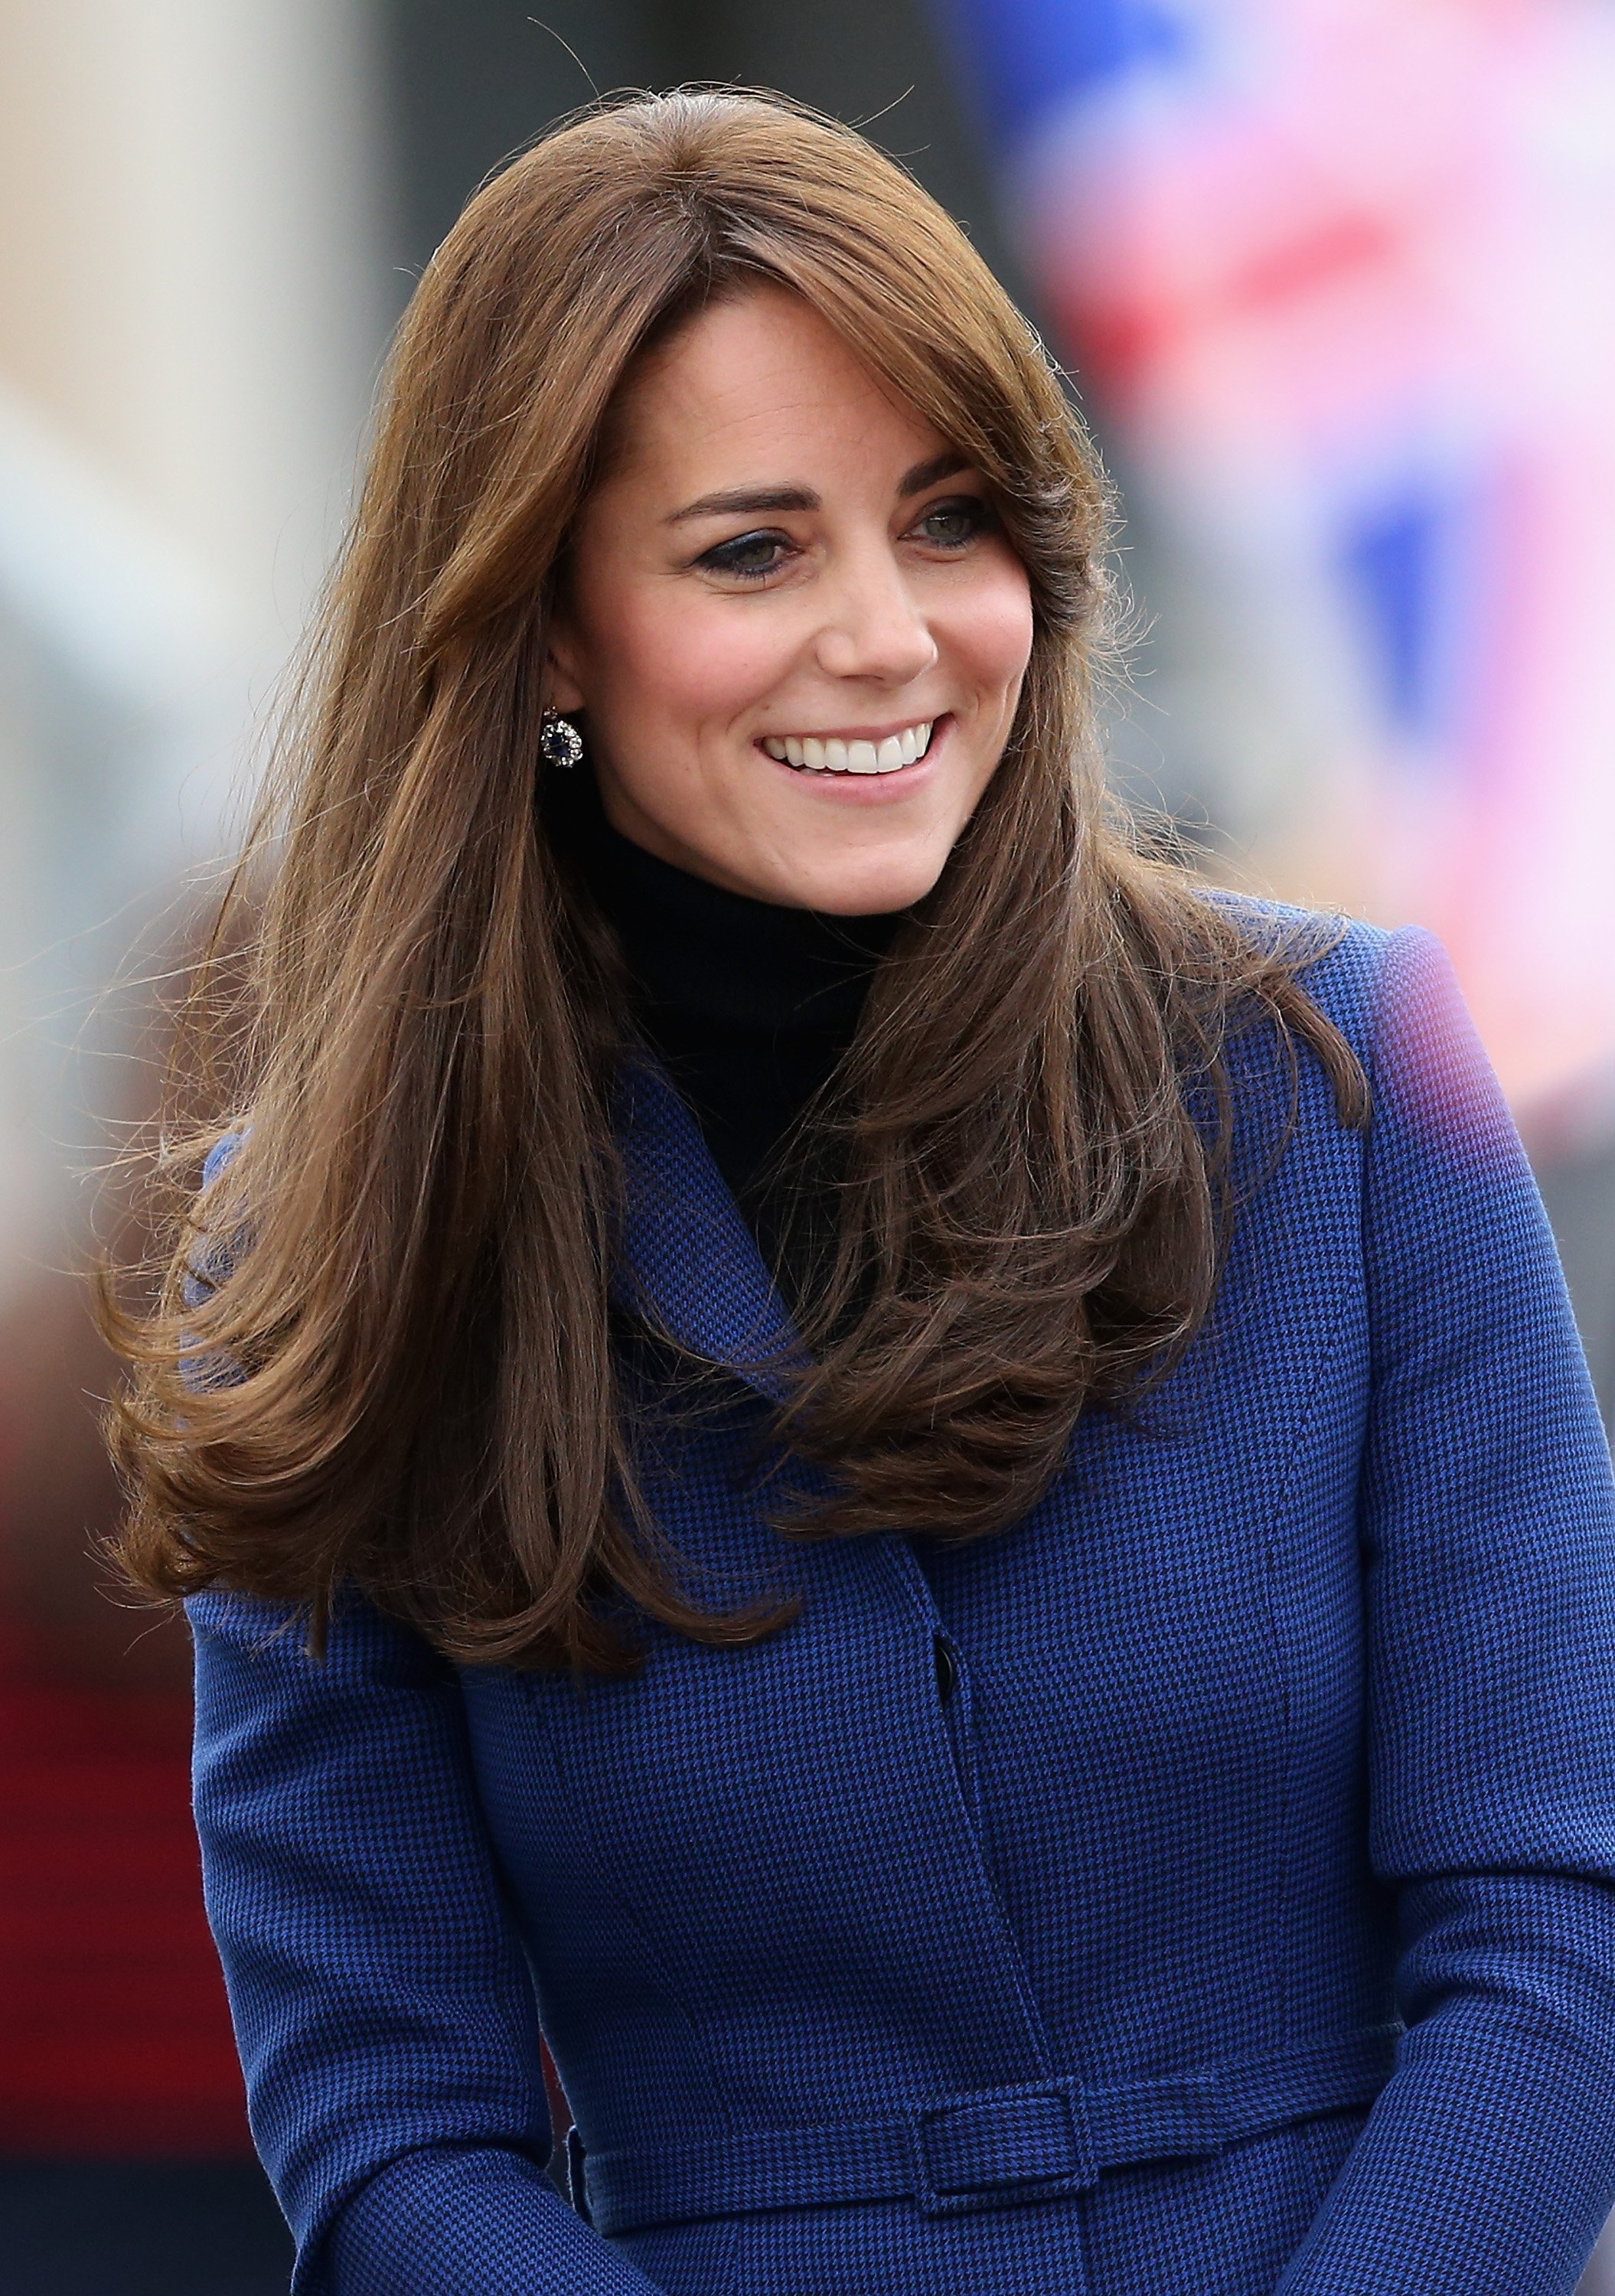 The Duchess of Cambridge | Photo: Getty Images